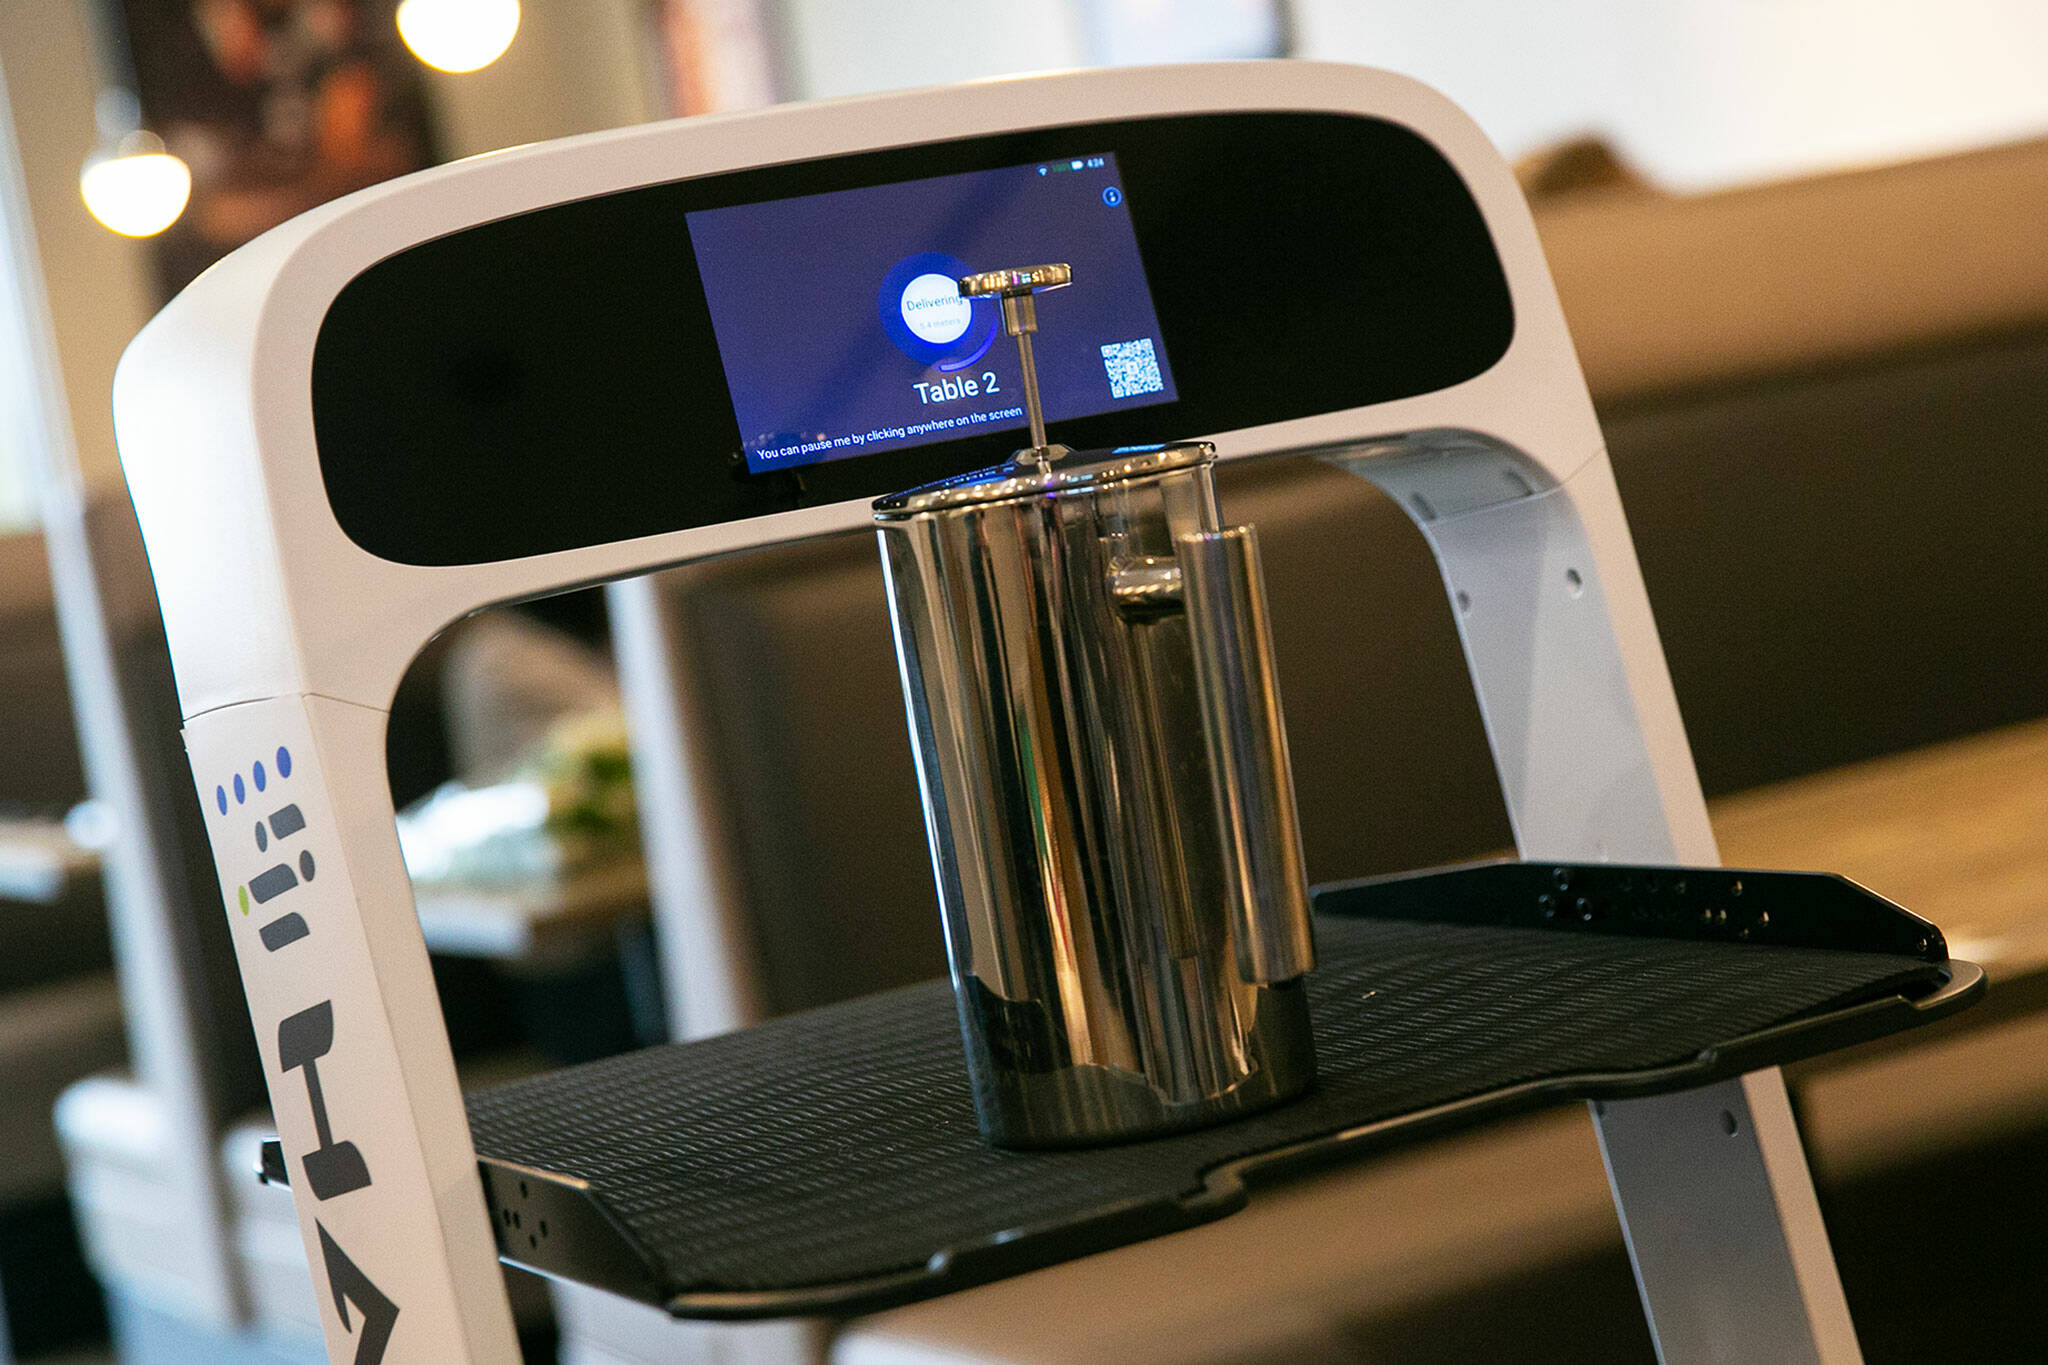 Peanut the server robot takes a tea press to table 2 while serving tables at Sushi Hana on Thursday, Jan. 5, 2023, in Lynnwood, Washington. (Ryan Berry / The Herald)